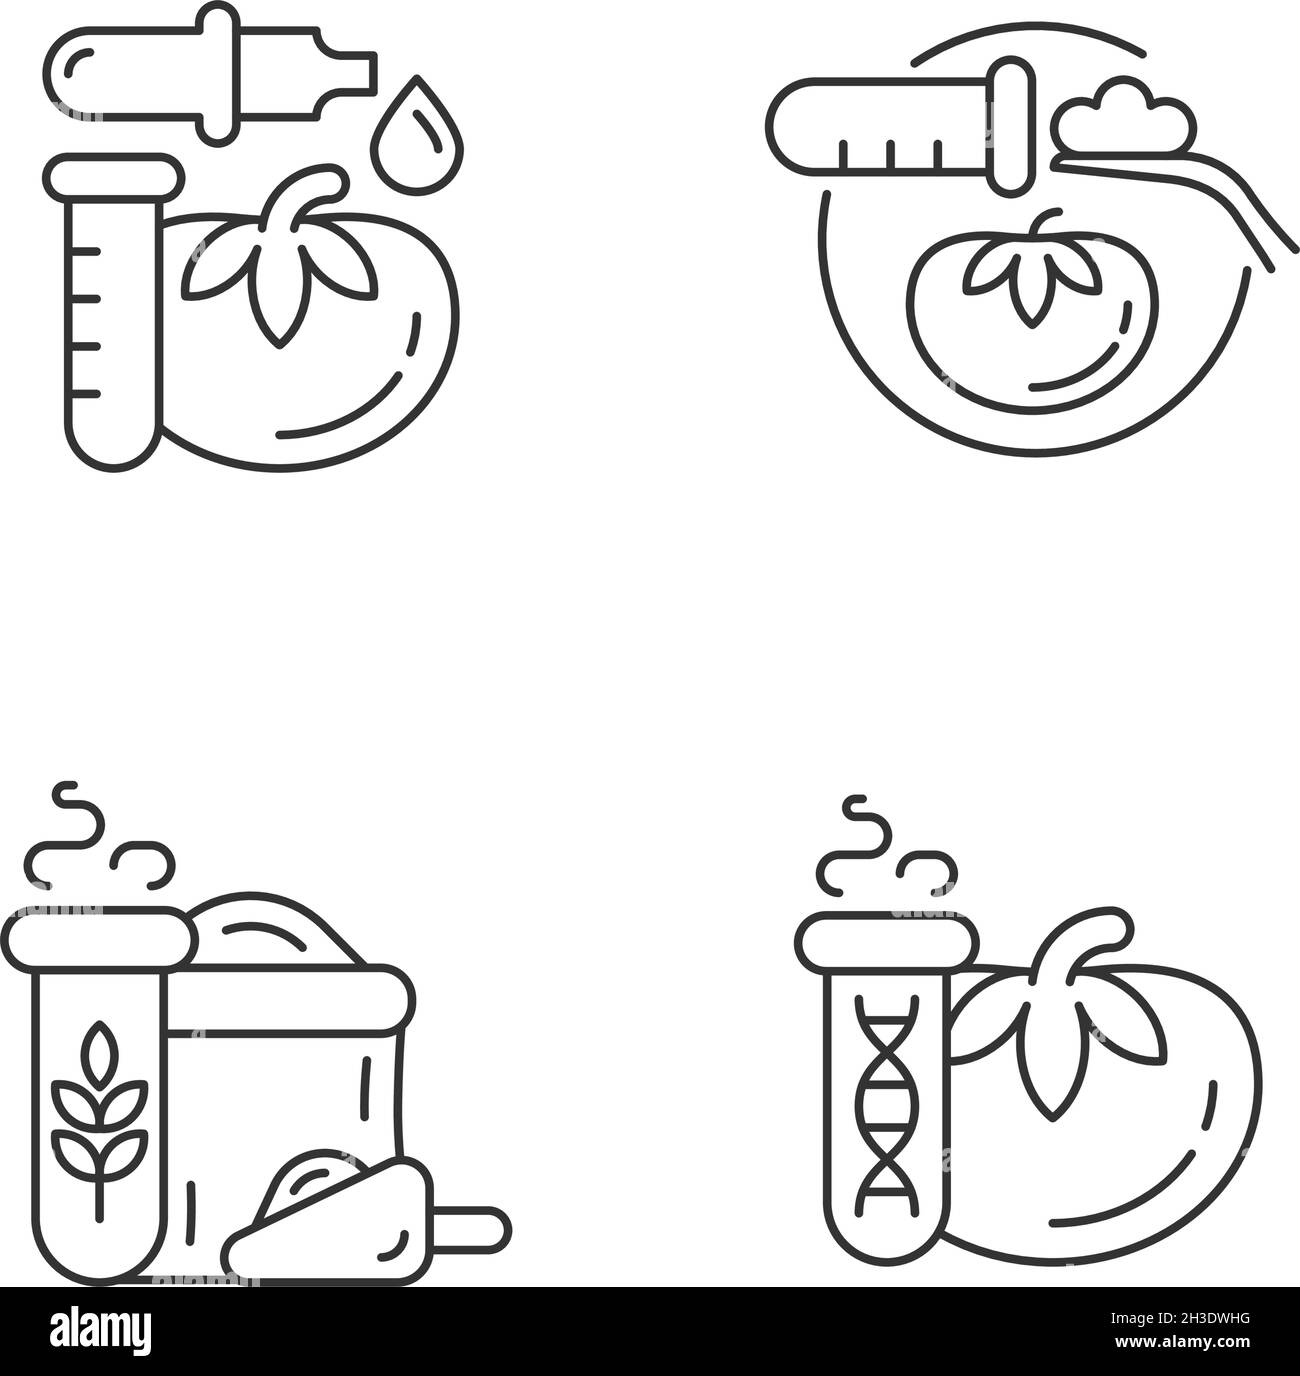 Artificial food additives linear icons set Stock Vector